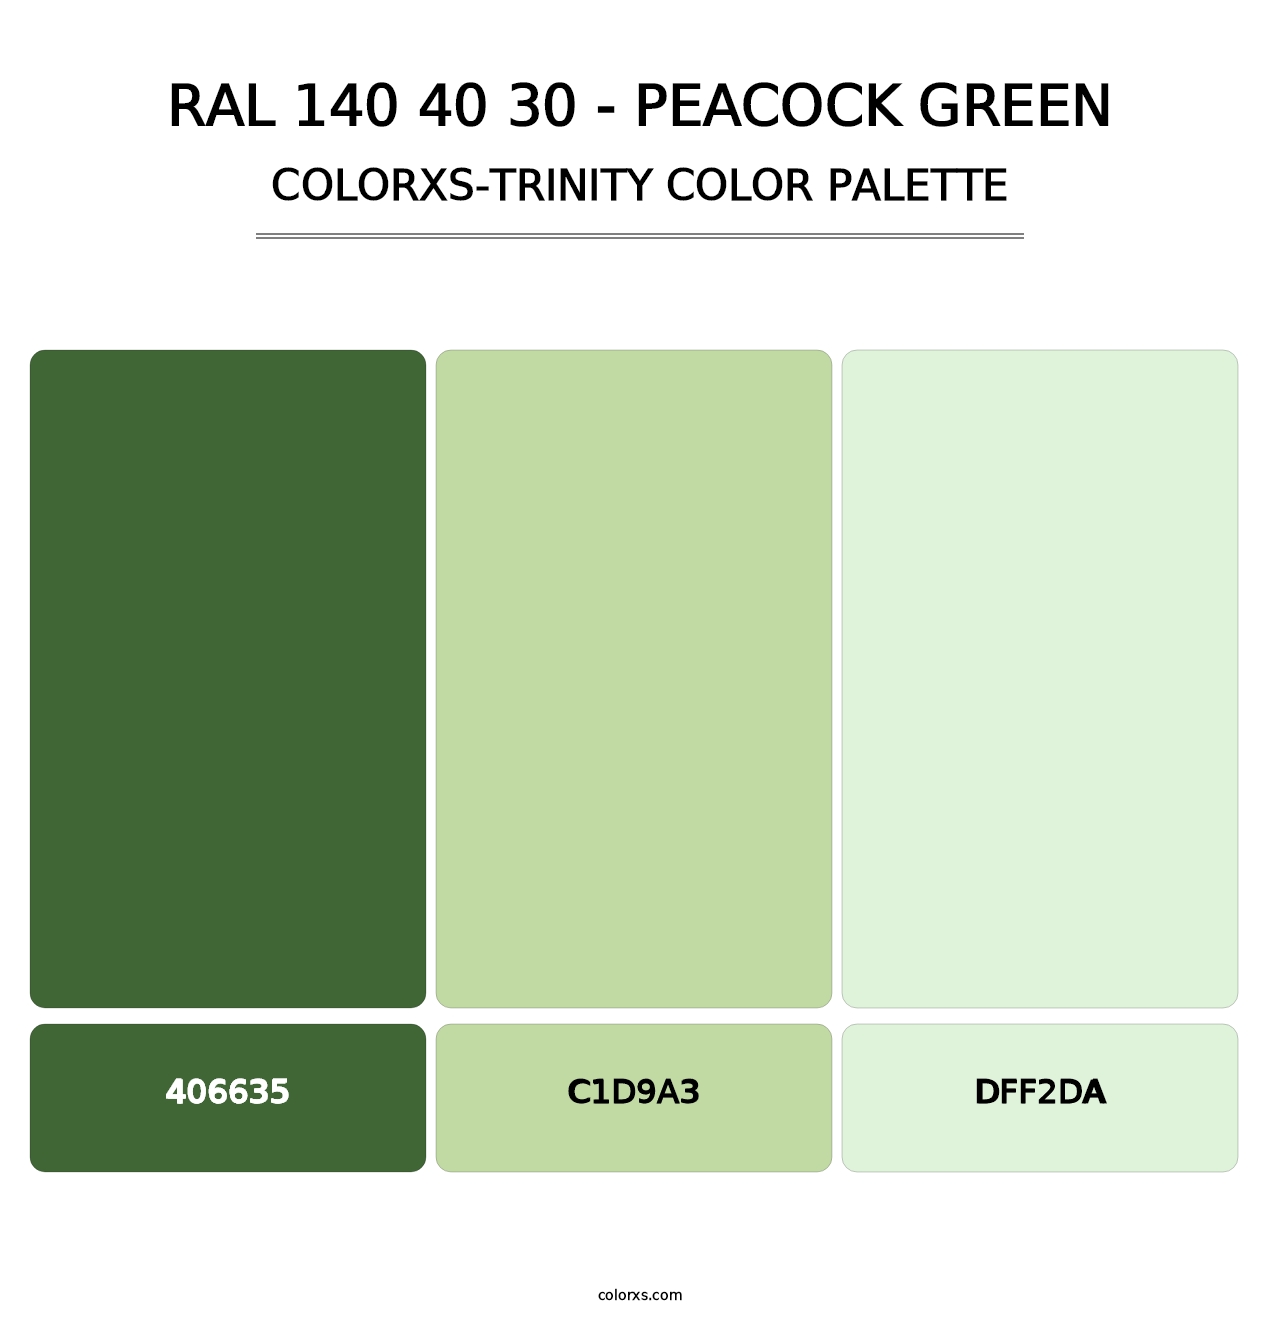 RAL 140 40 30 - Peacock Green - Colorxs Trinity Palette